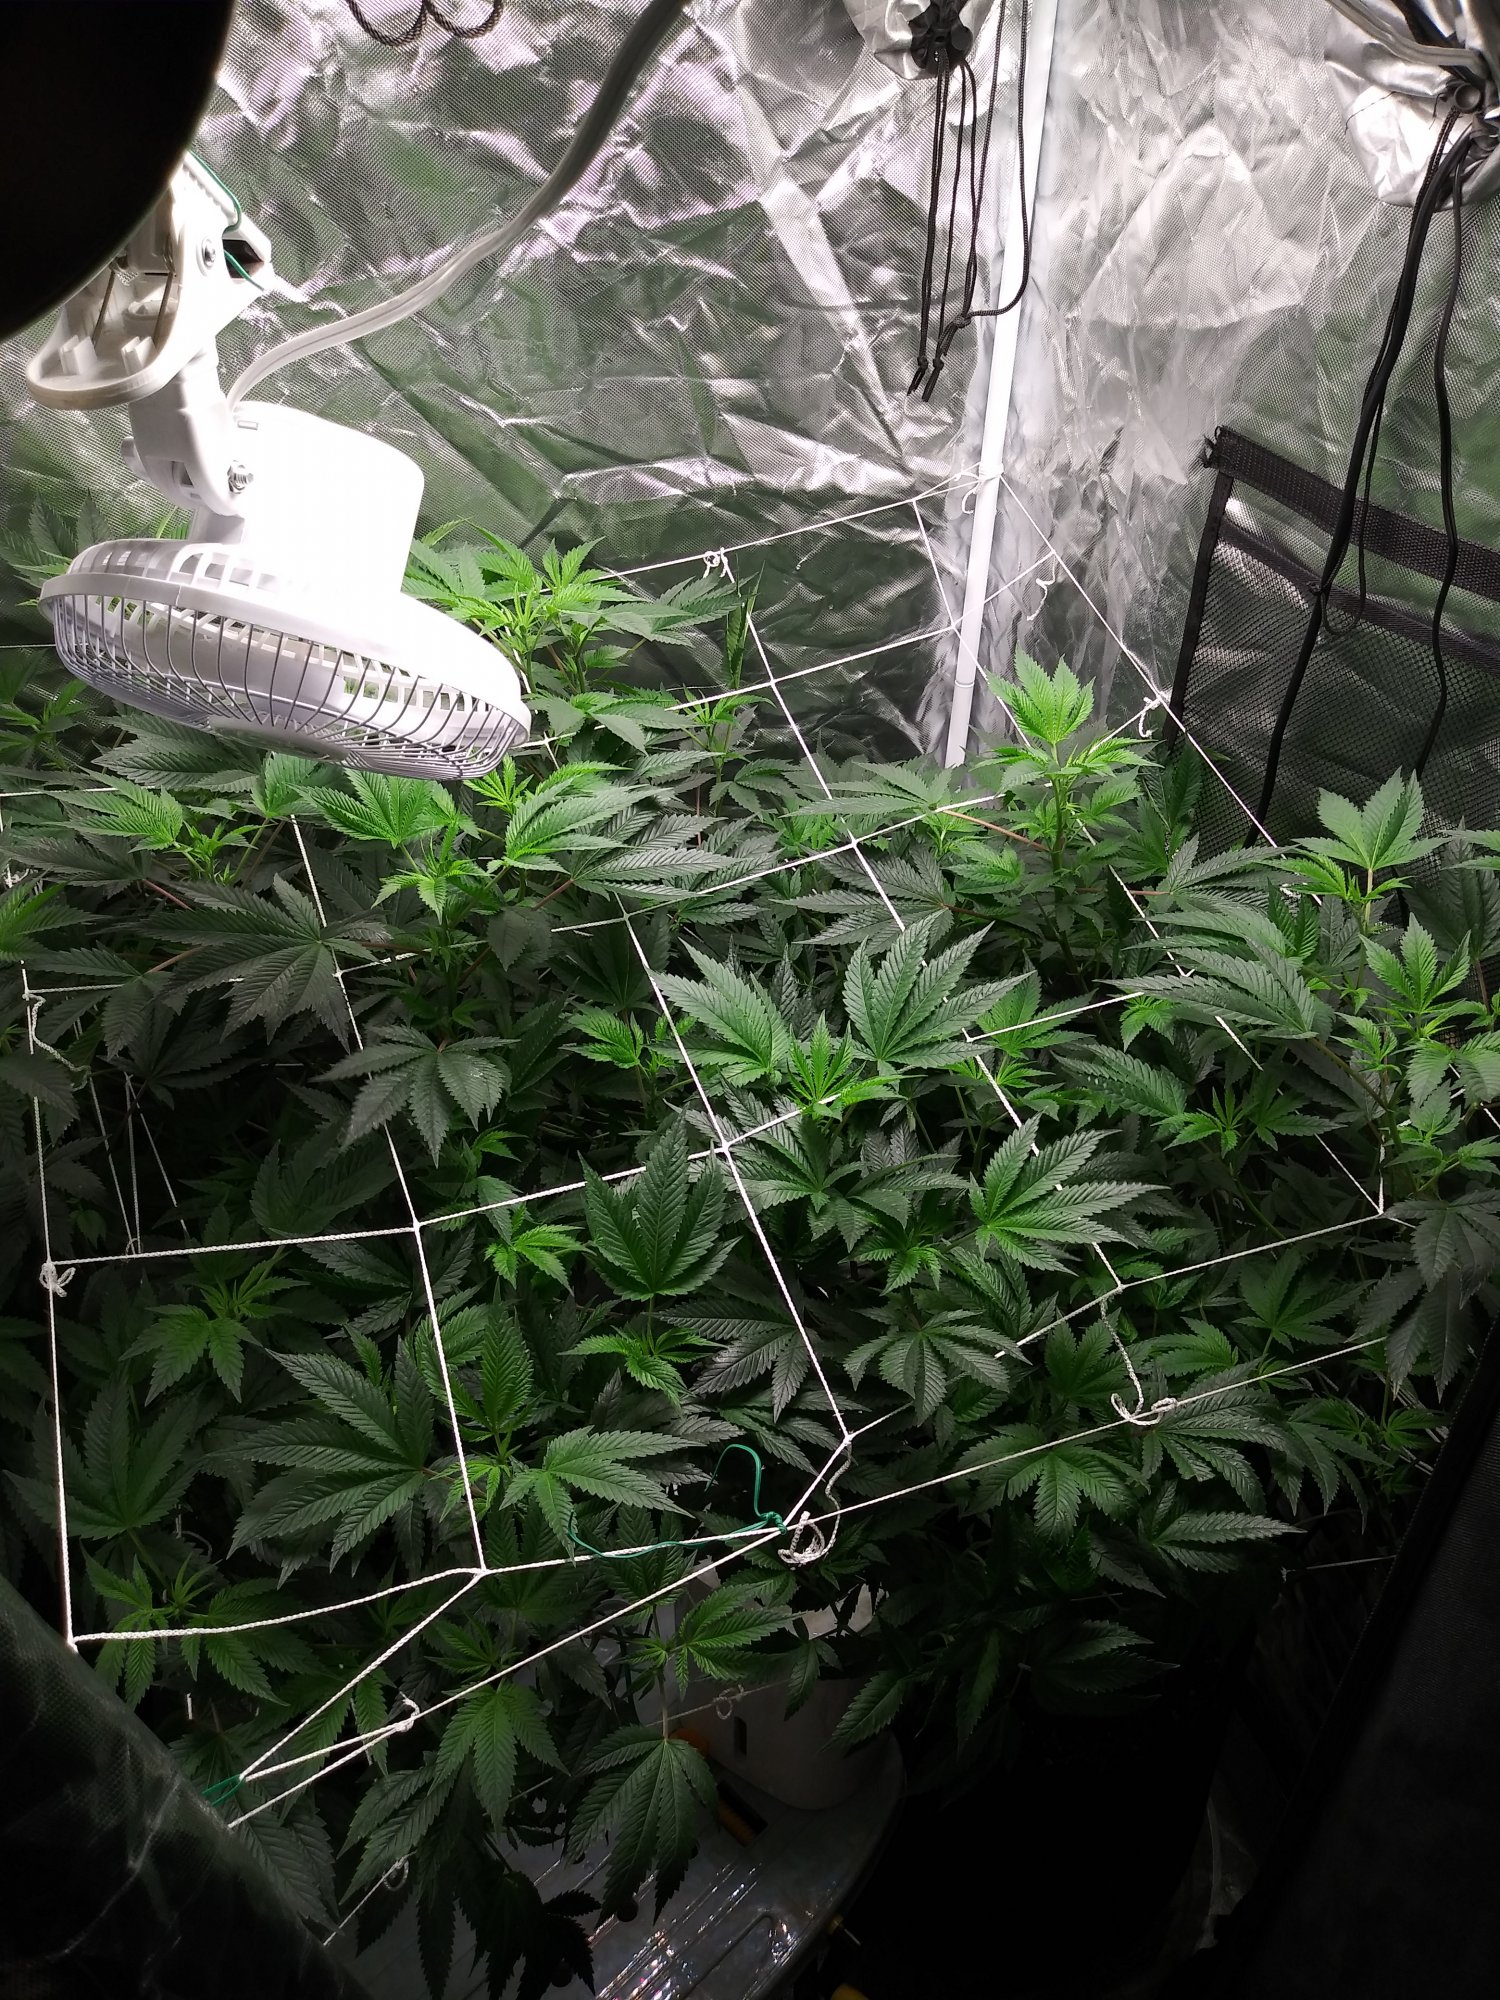 Having problems on my first grow need help please